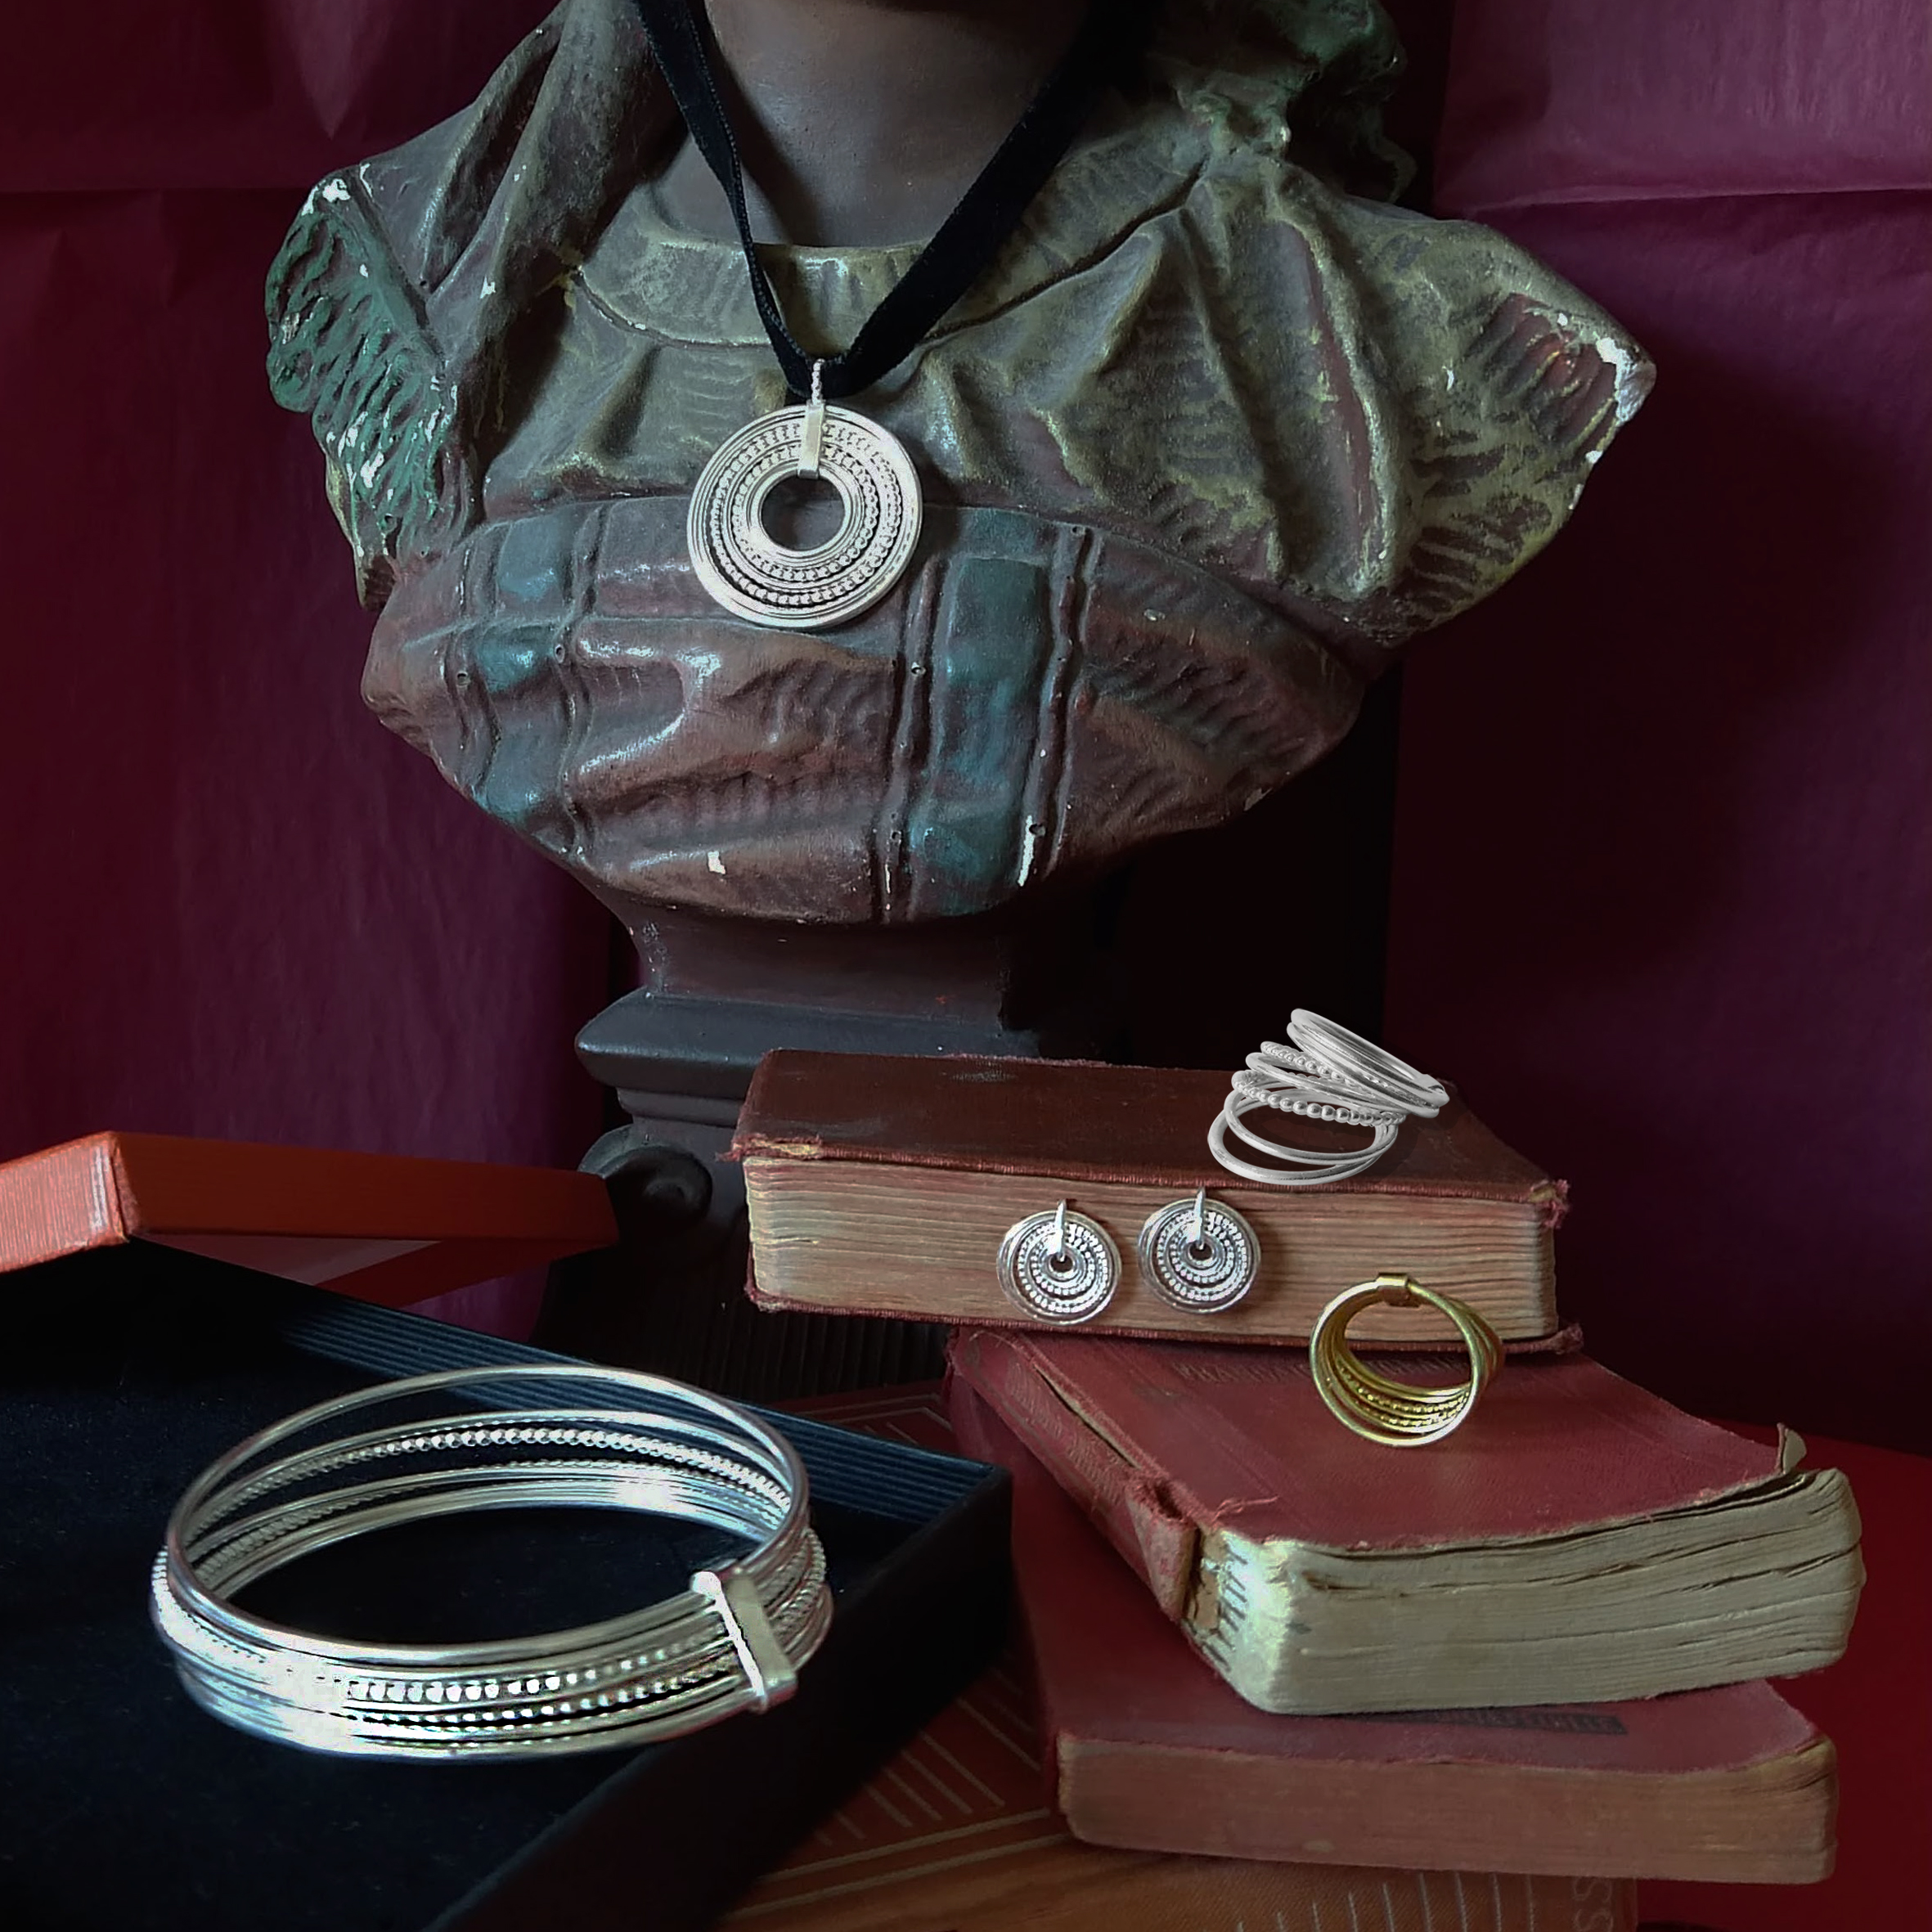 Scheherazade jewellery capsule collection - gold and silver jewellery pieces as still life painting